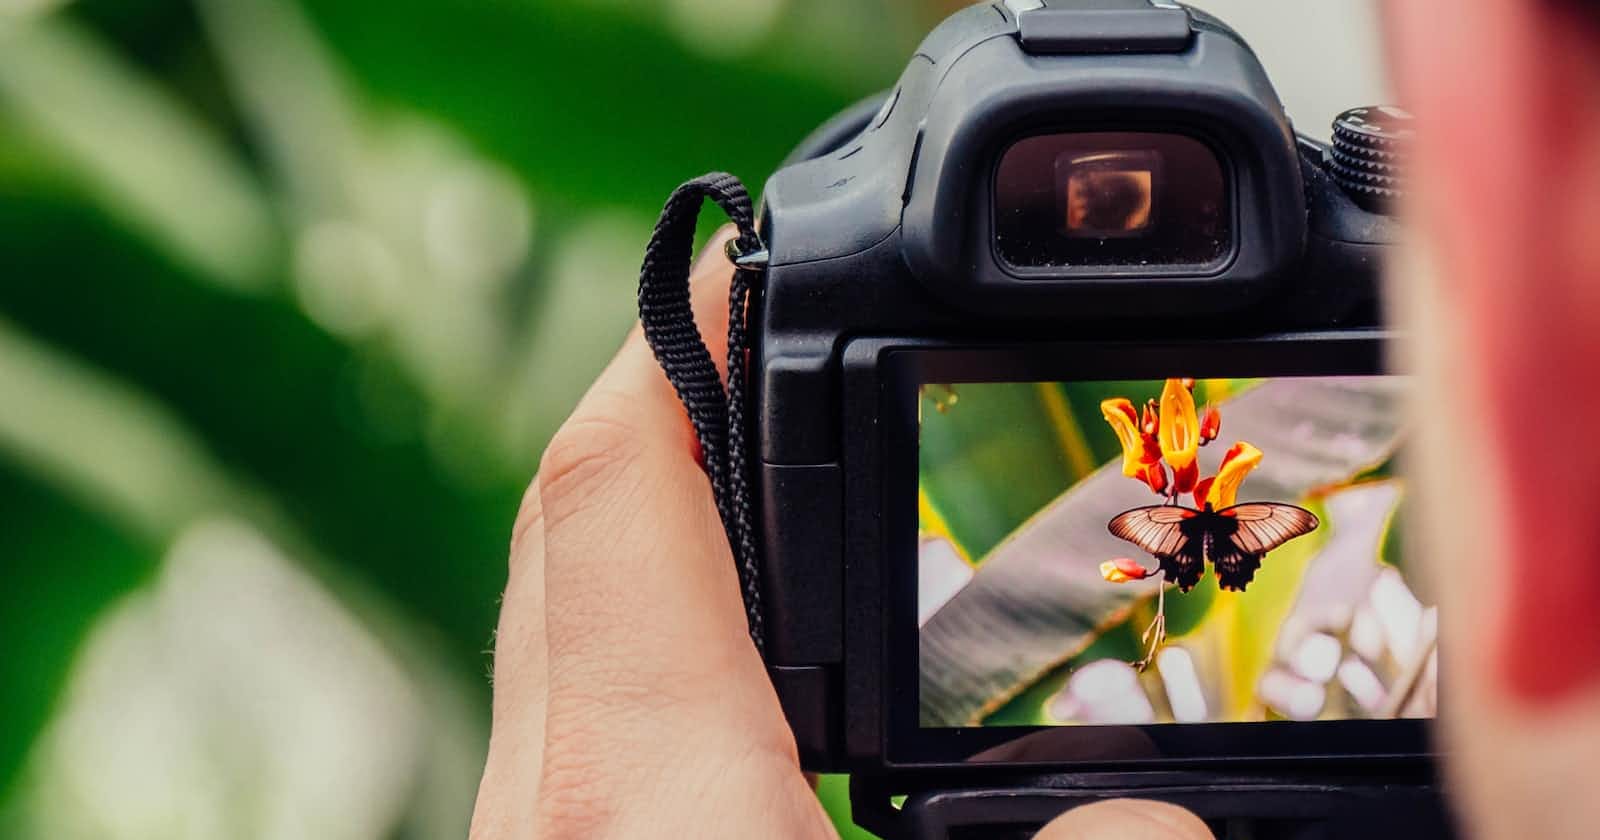 5 YouTube Channels to Help You Improve Your Photography Skills